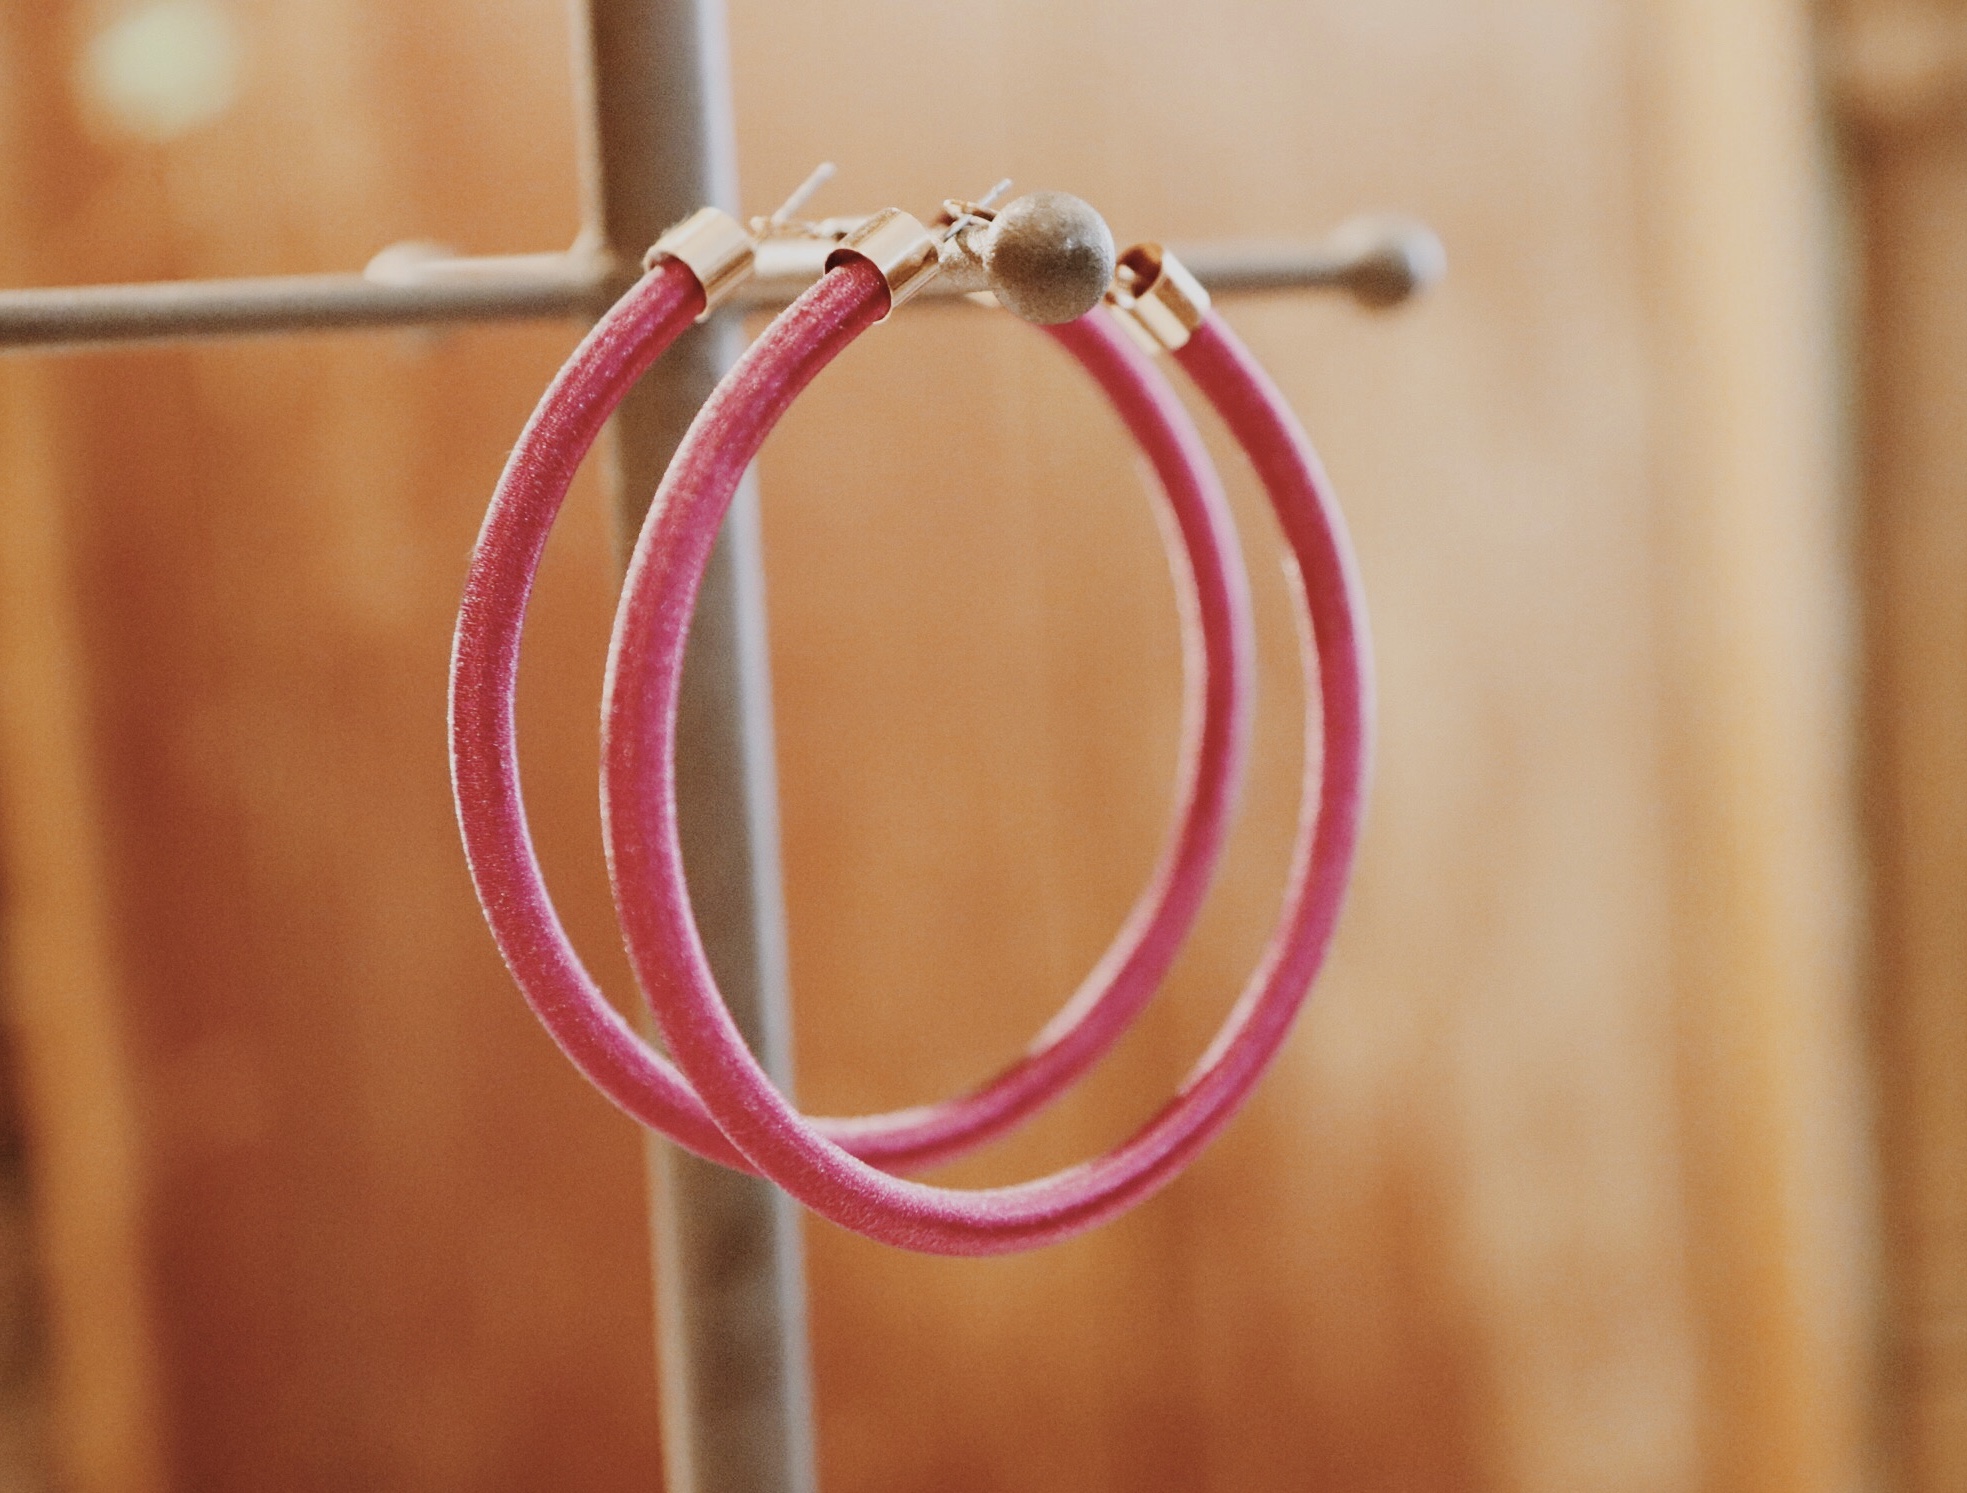 This pair of lovely magenta hoops is 3.25 inches across. The perfect pair of hoops to top off any bright outfit!